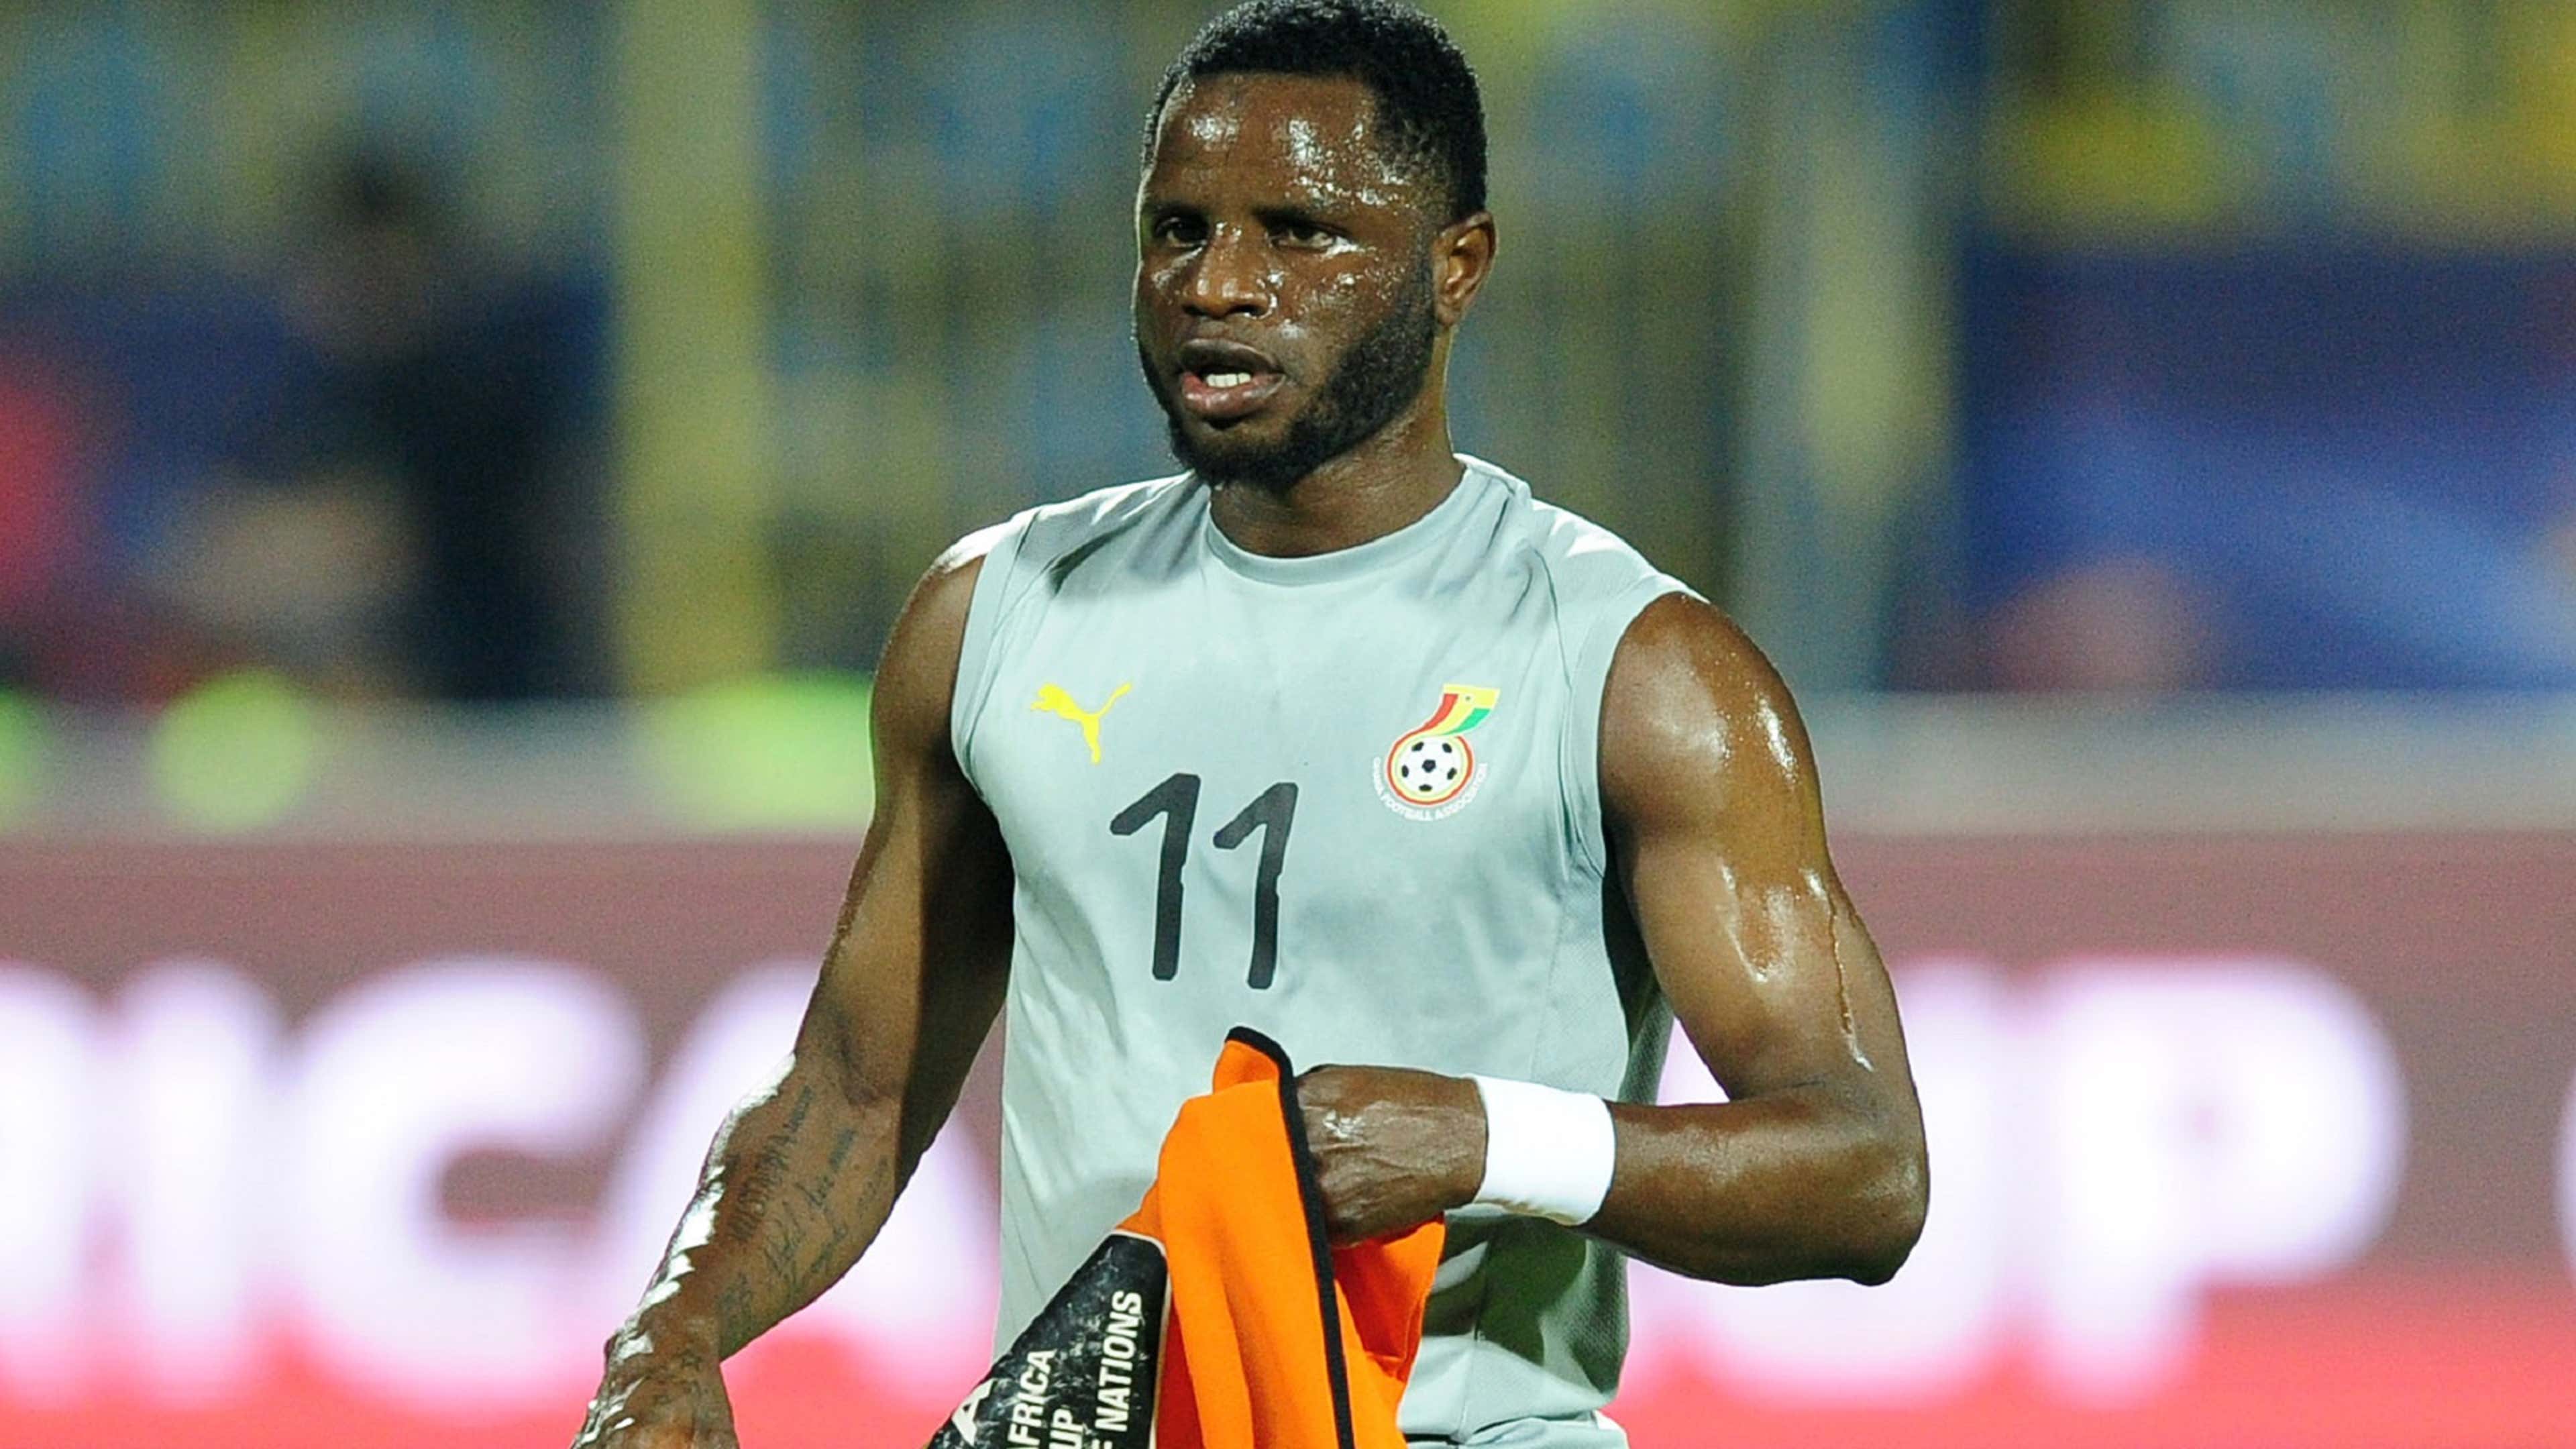 Mubarak Wakaso of Ghana warms up before the 2019 Africa Cup of Nations Finals game between Ghana and Benin at Ismailia Stadium in Ismailia, Egypt on 25 June 2019